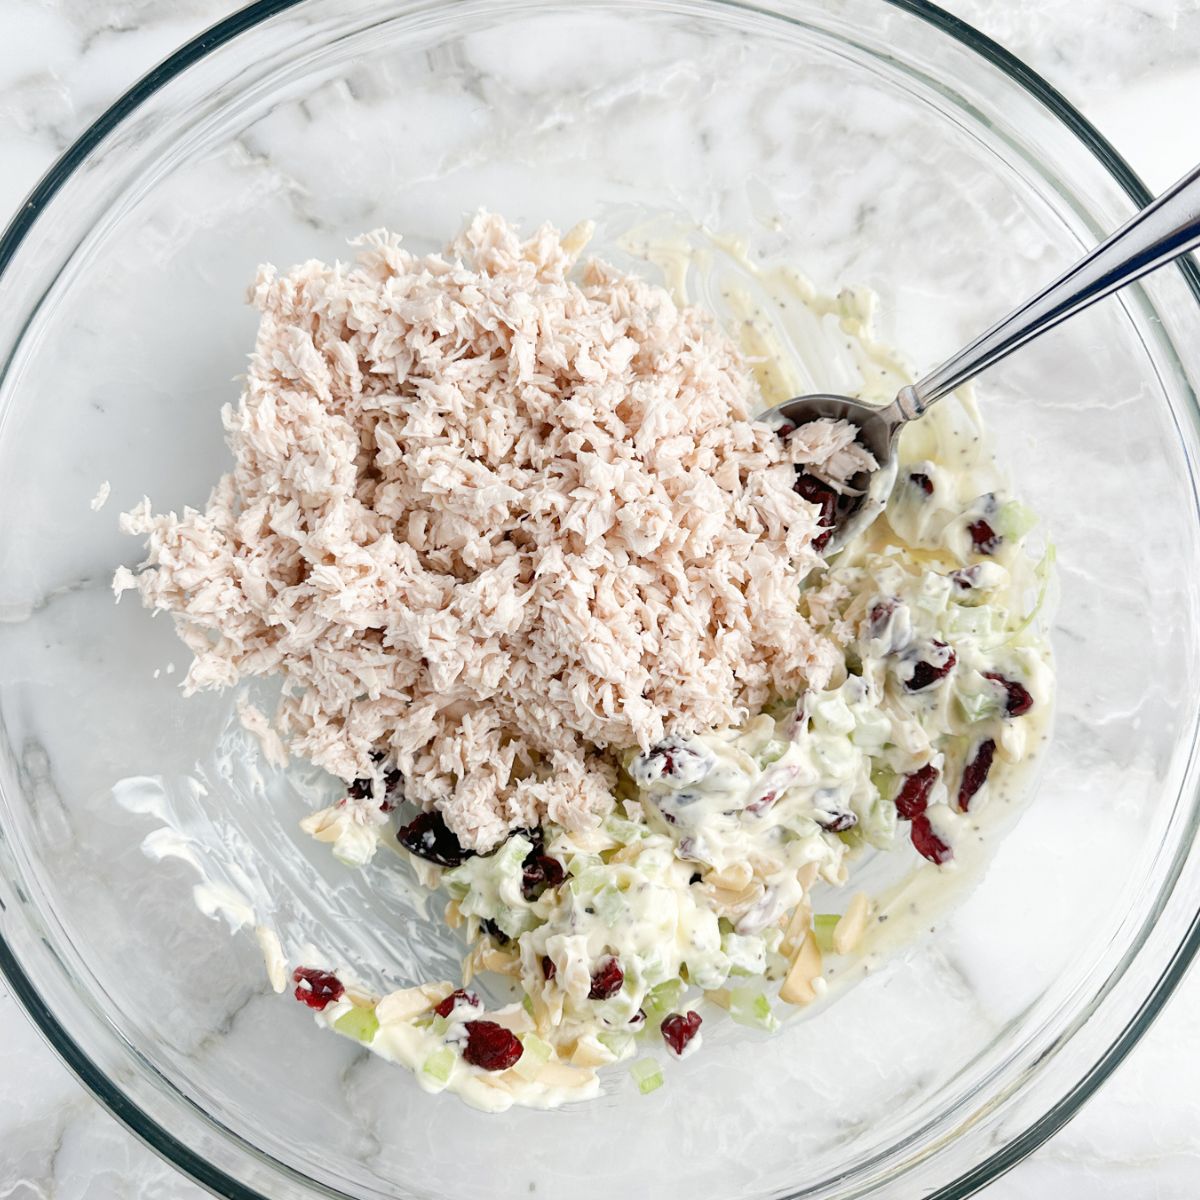 Bowl of shredded chicken, mayonnaise, diced celery, and cranberries.